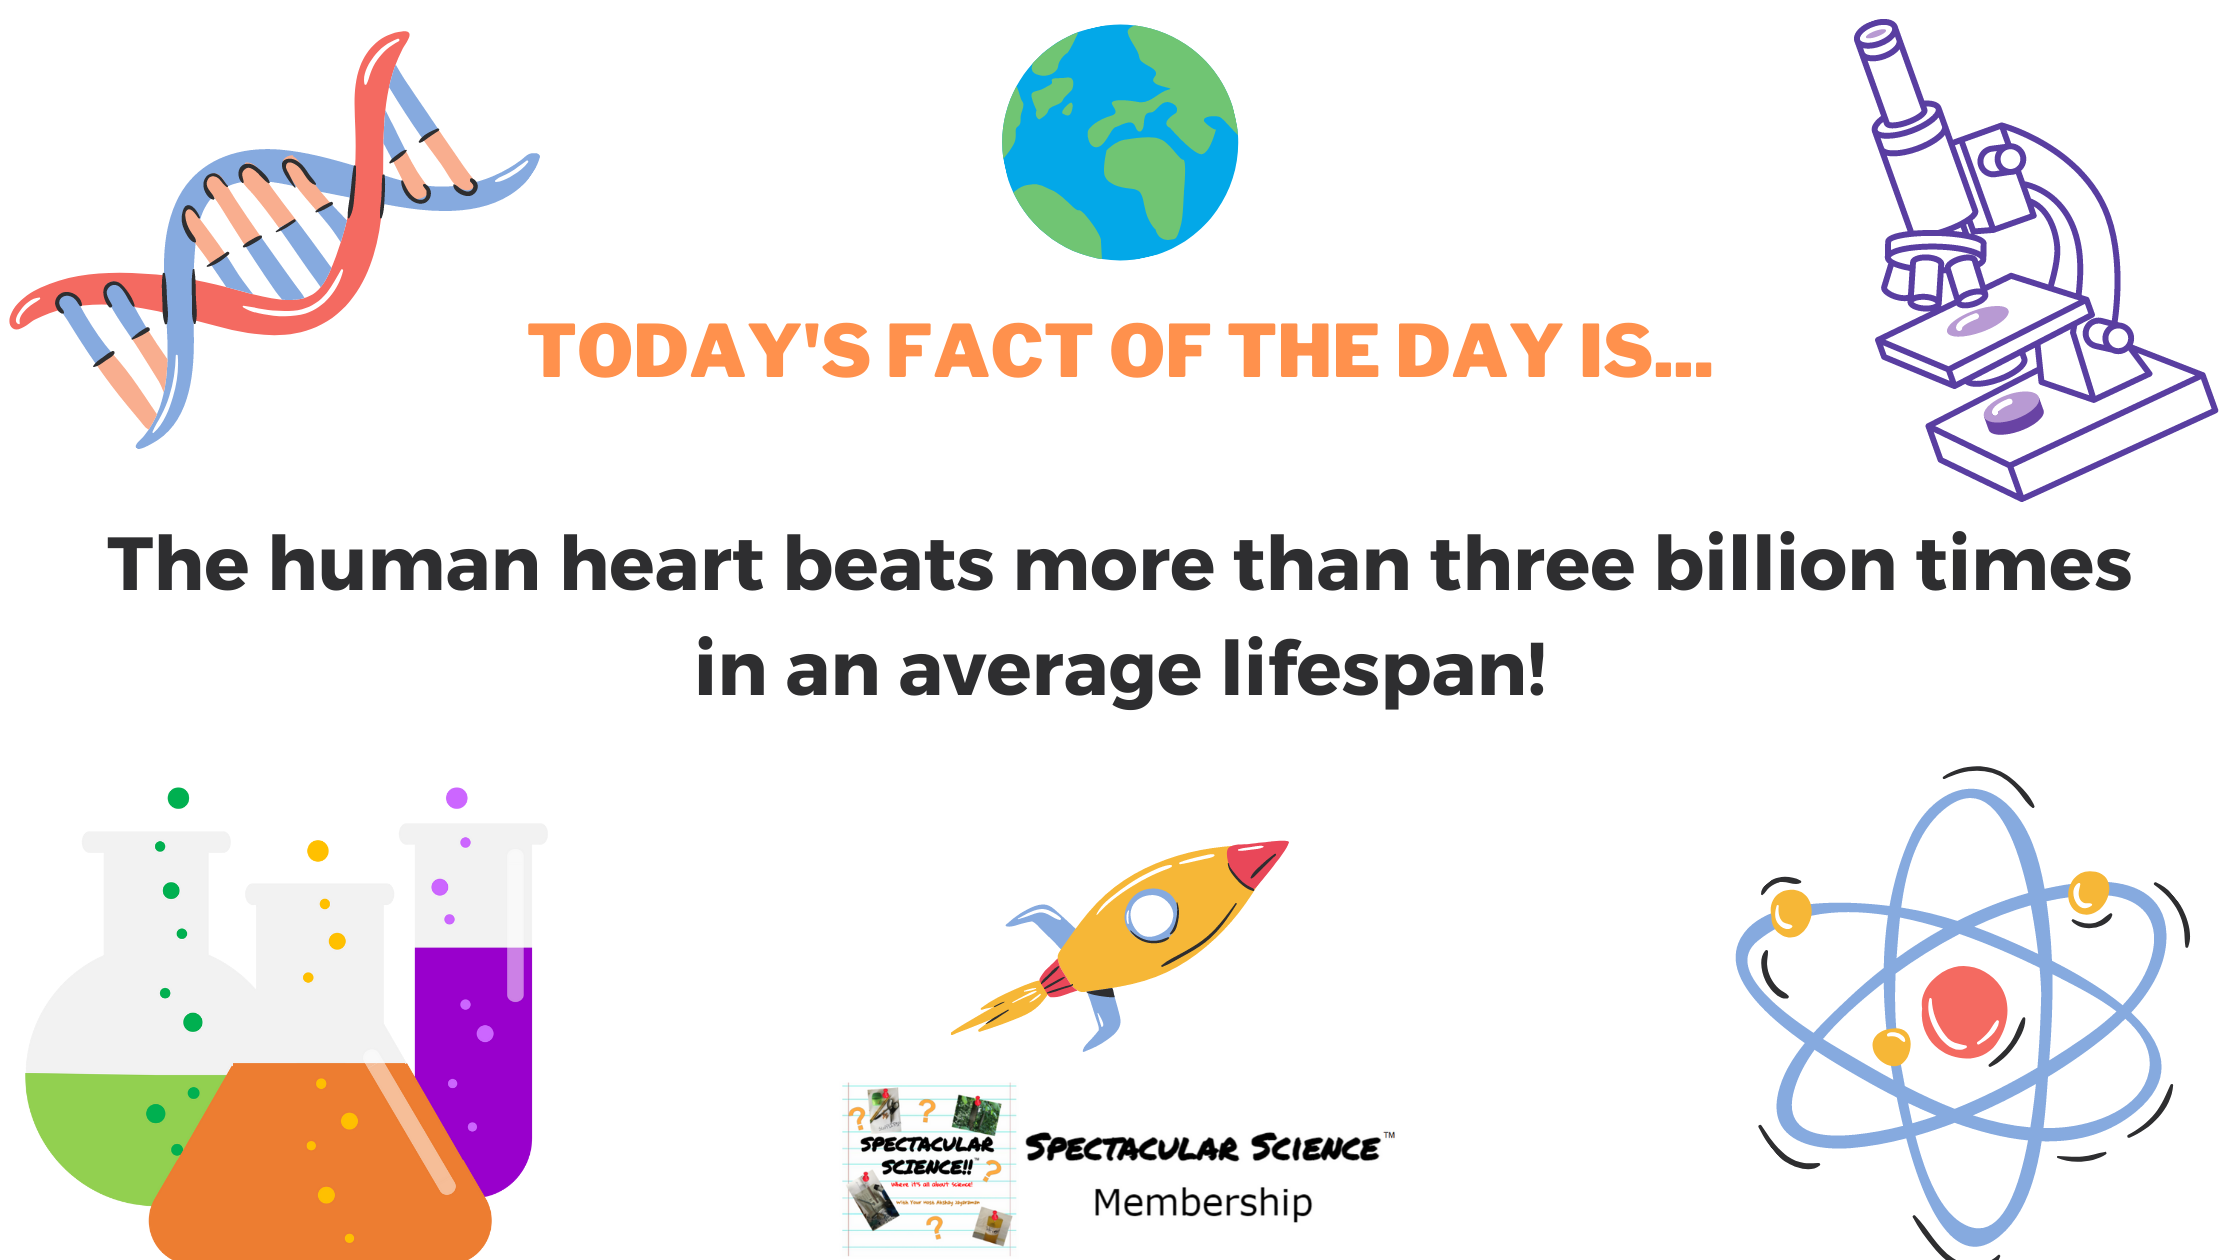 Fact of the Day Image Apr. 9th